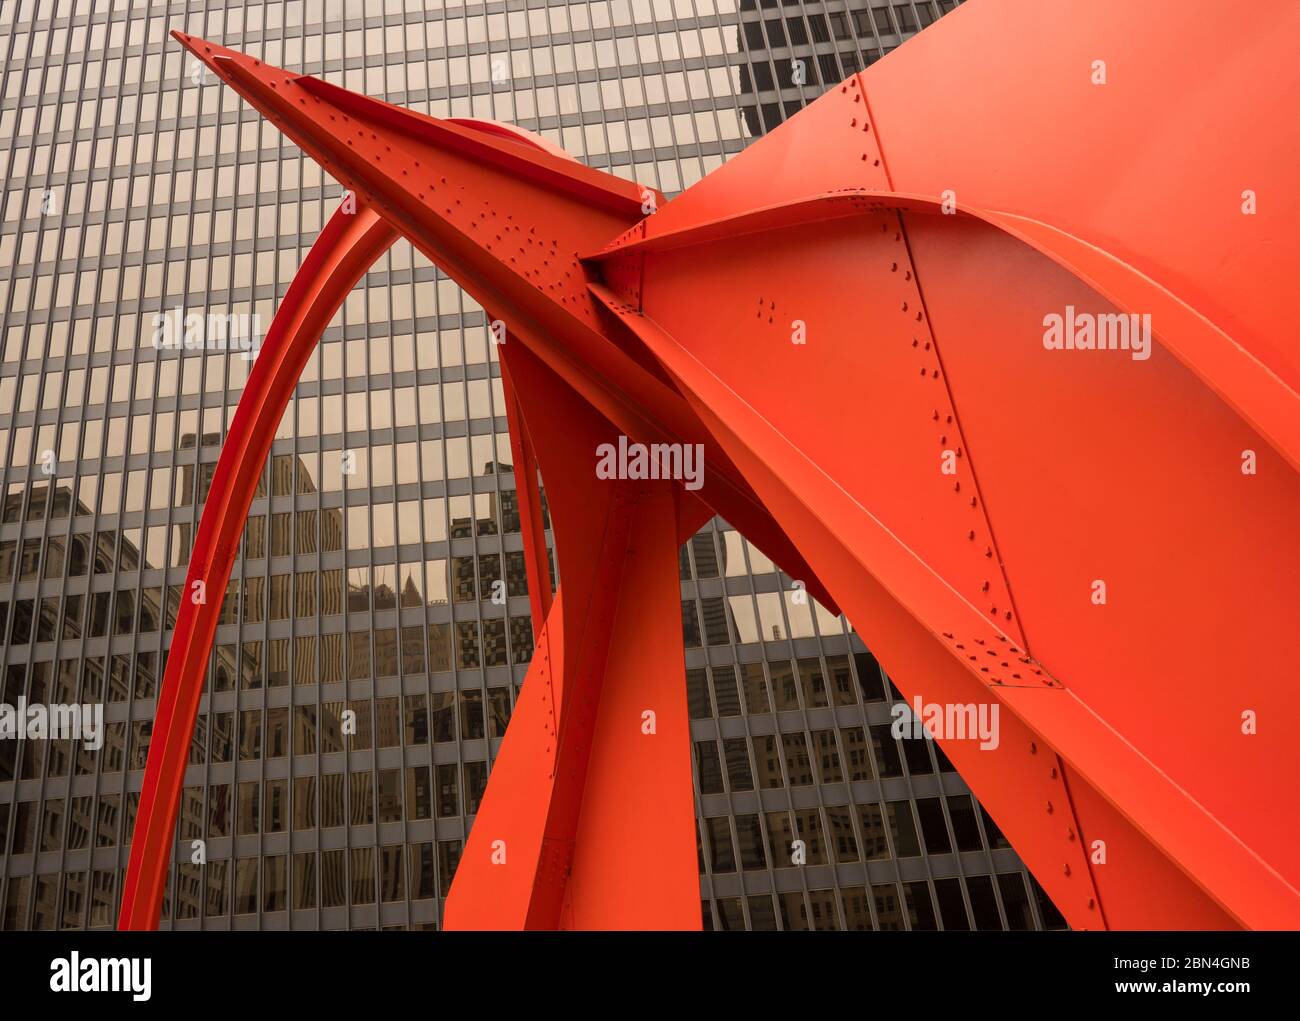 Flamingo sculpture by Alexander Calder in federal plaza Chicago Illinois Stock Photo